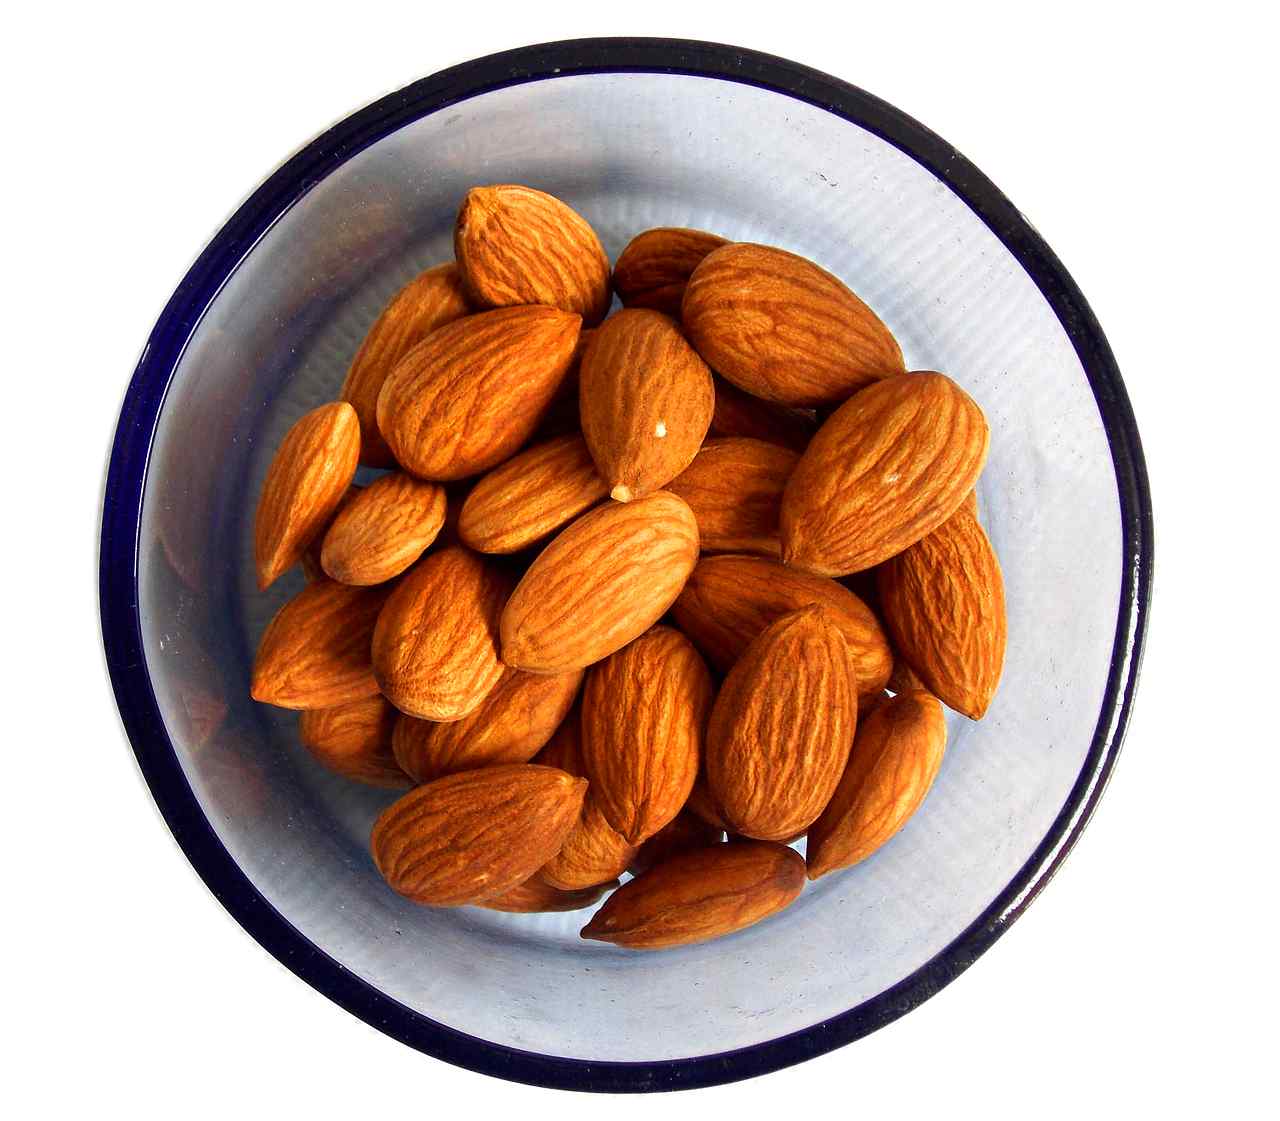 The oil comes from countries with significant almond cultivation, such as the United States, Spain, Italy, and Australia.